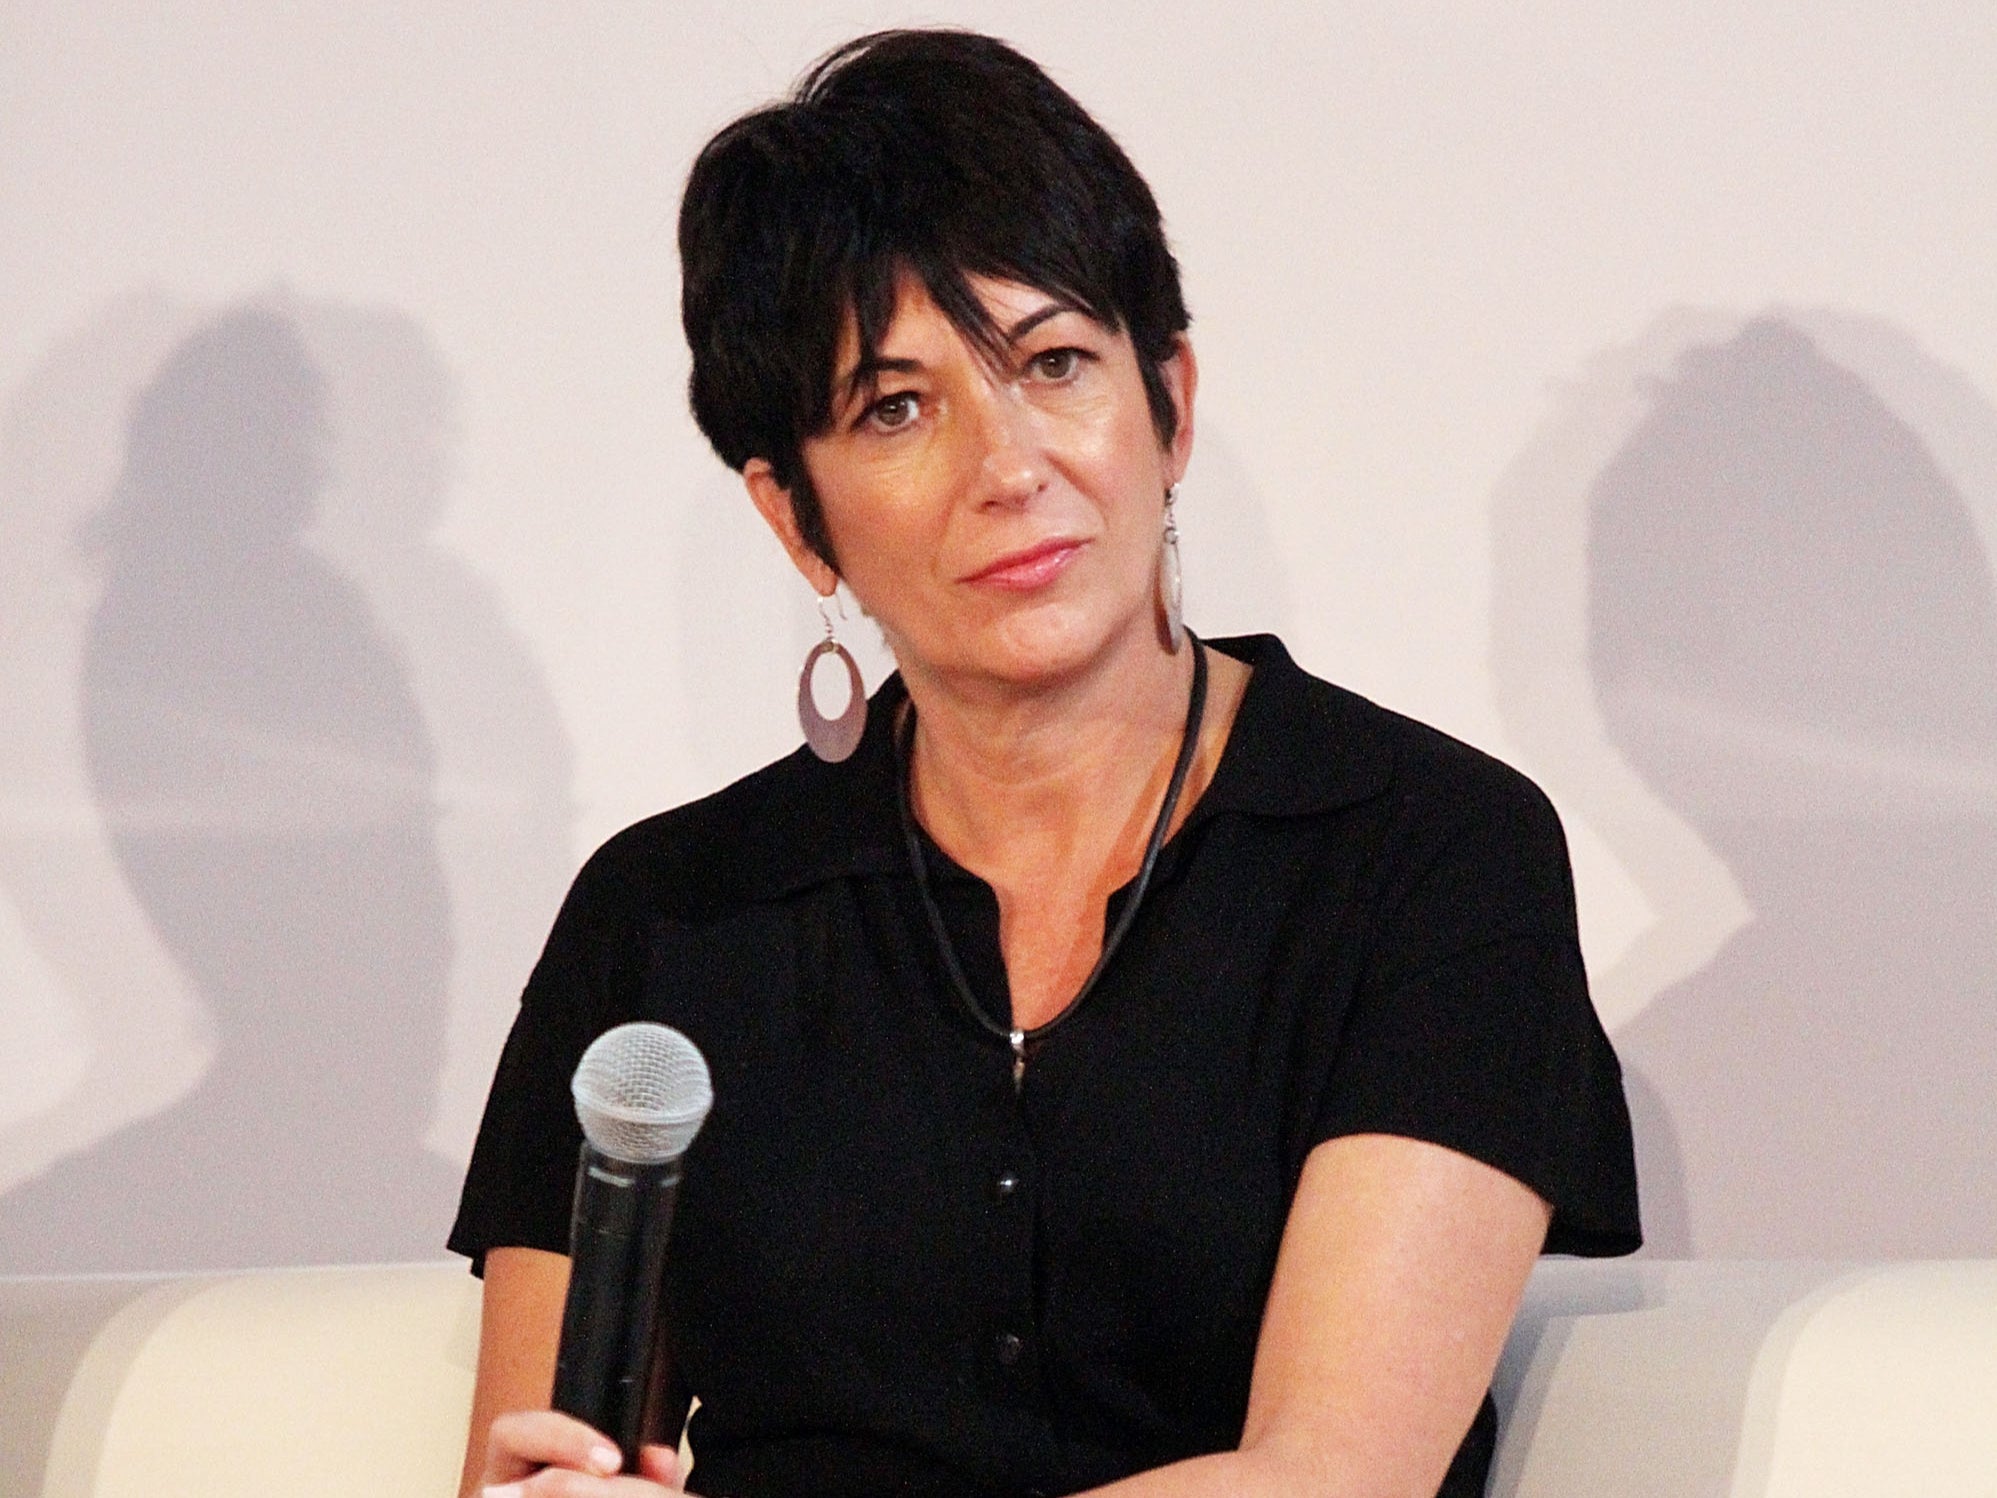 Boris Johnsons sister says he knew Ghislaine Maxwell at university The Independent